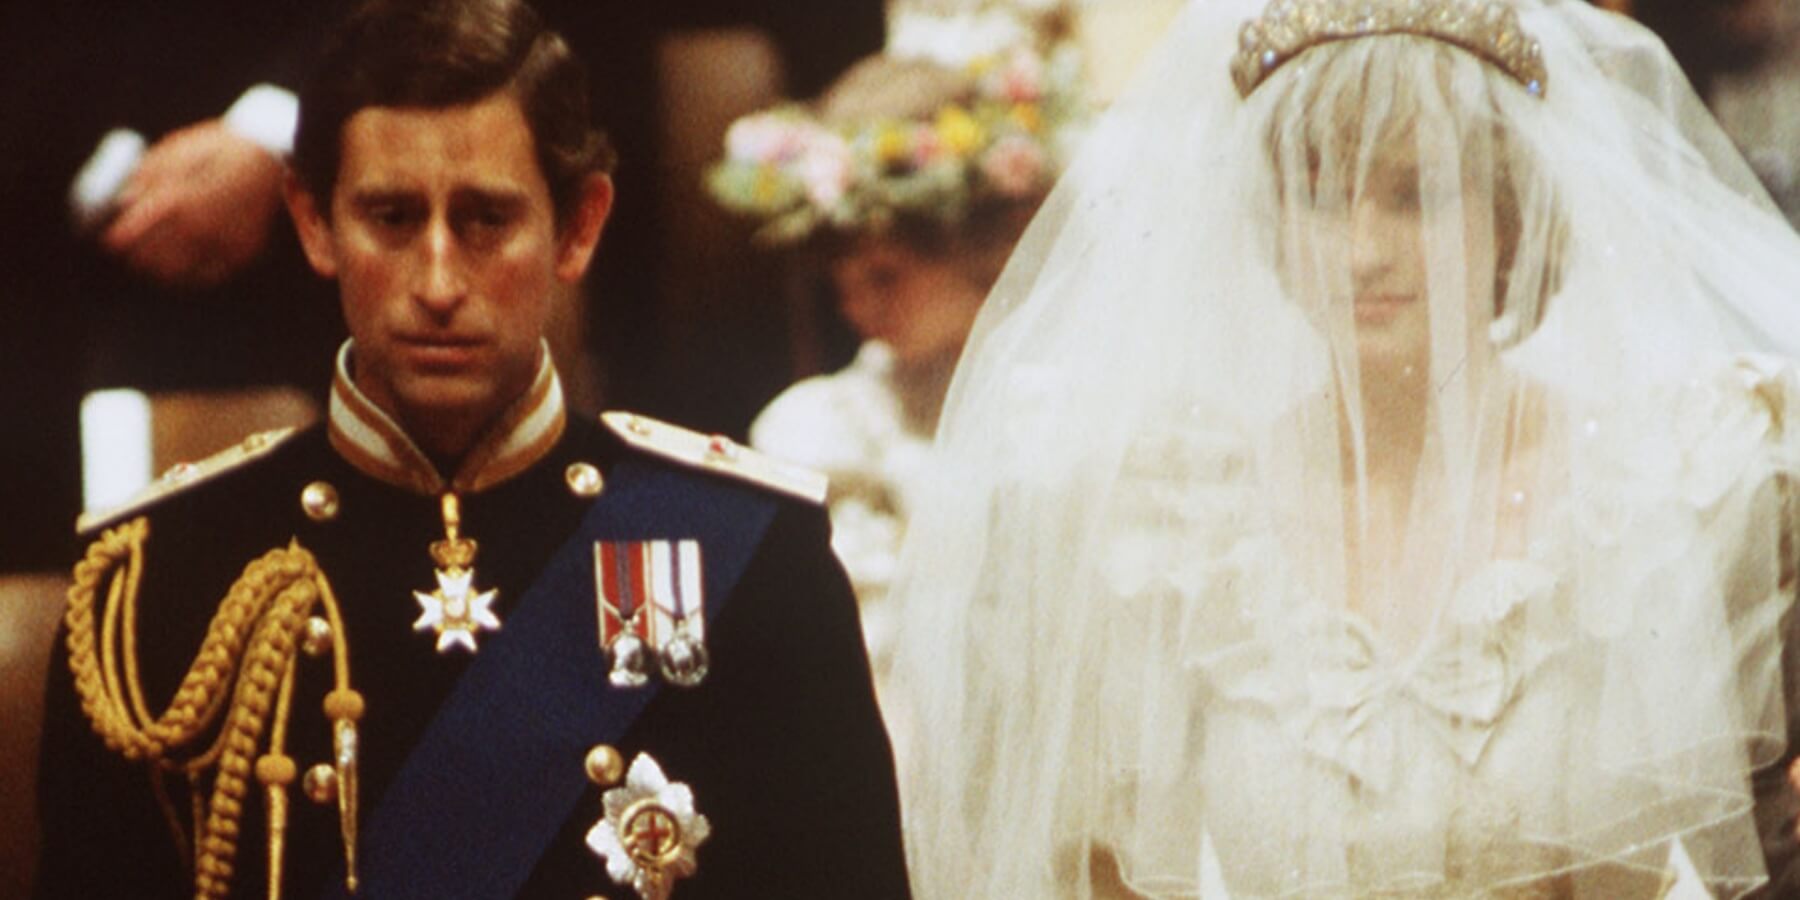 Charles and Diana during their 1981 wedding at St. Paul's Cathedral